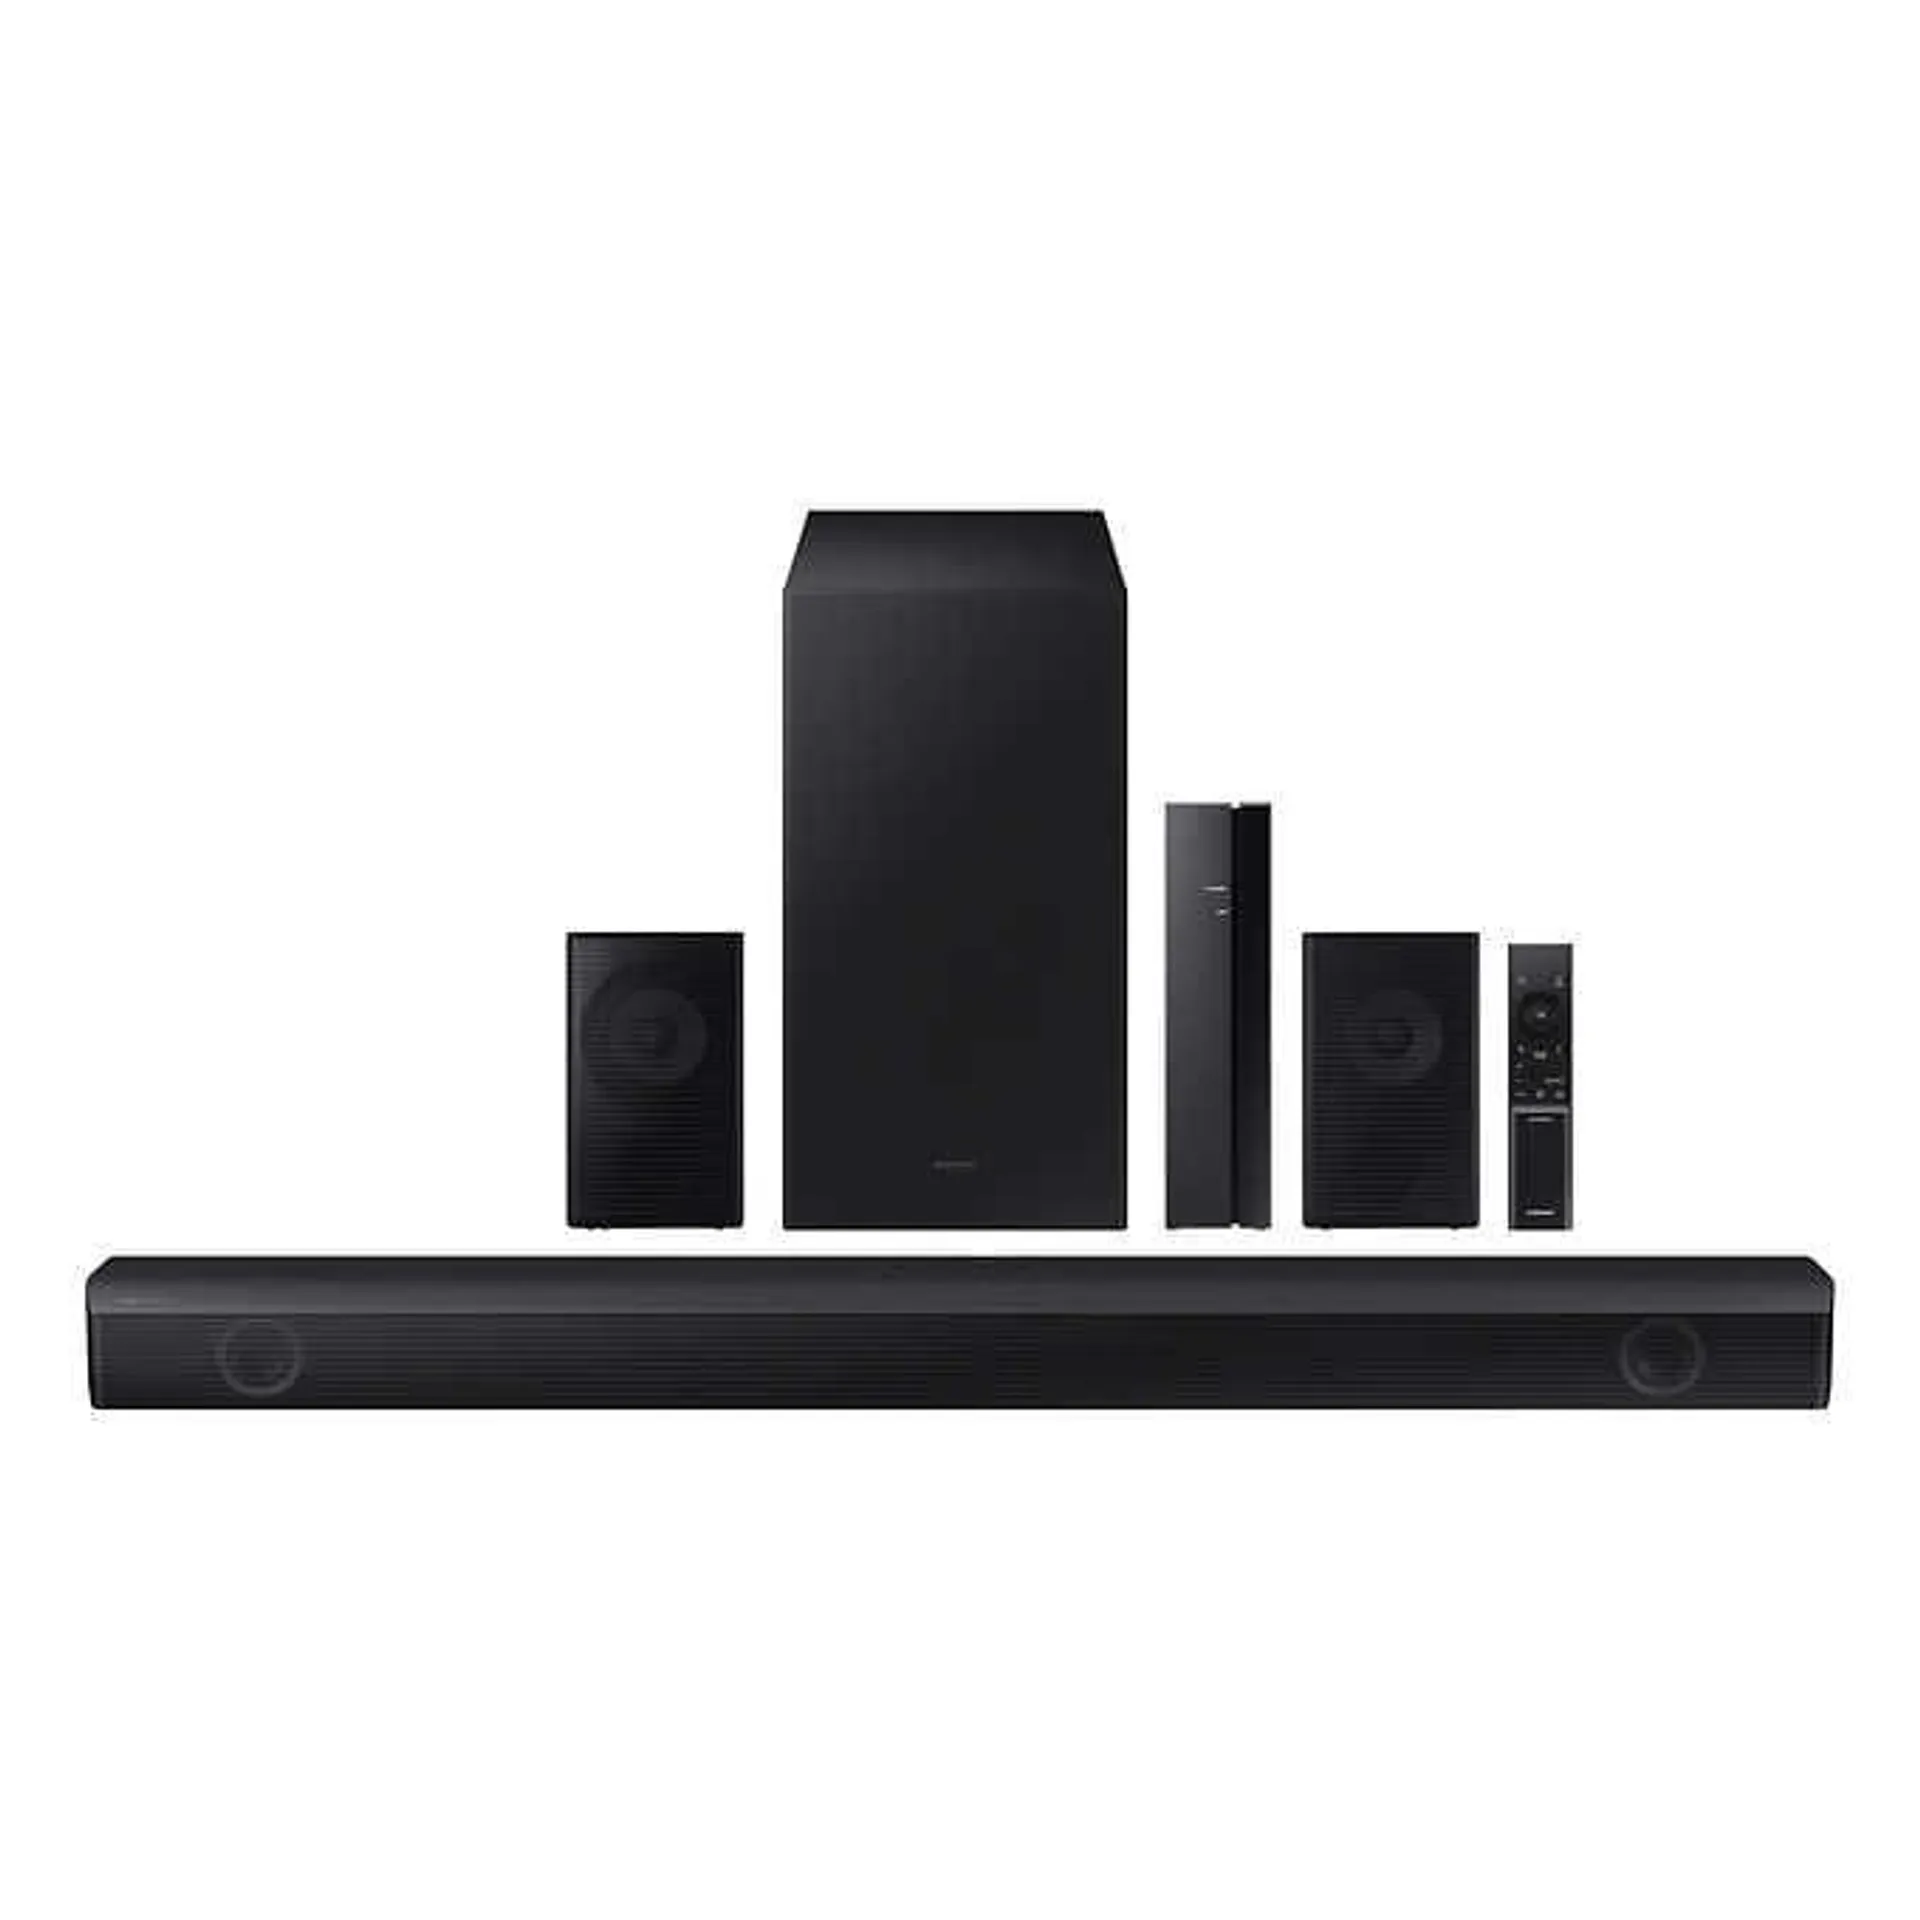 Samsung HW-B57C 4.1ch Soundbar with Dolby Audio and Rear Speaker Kit Included